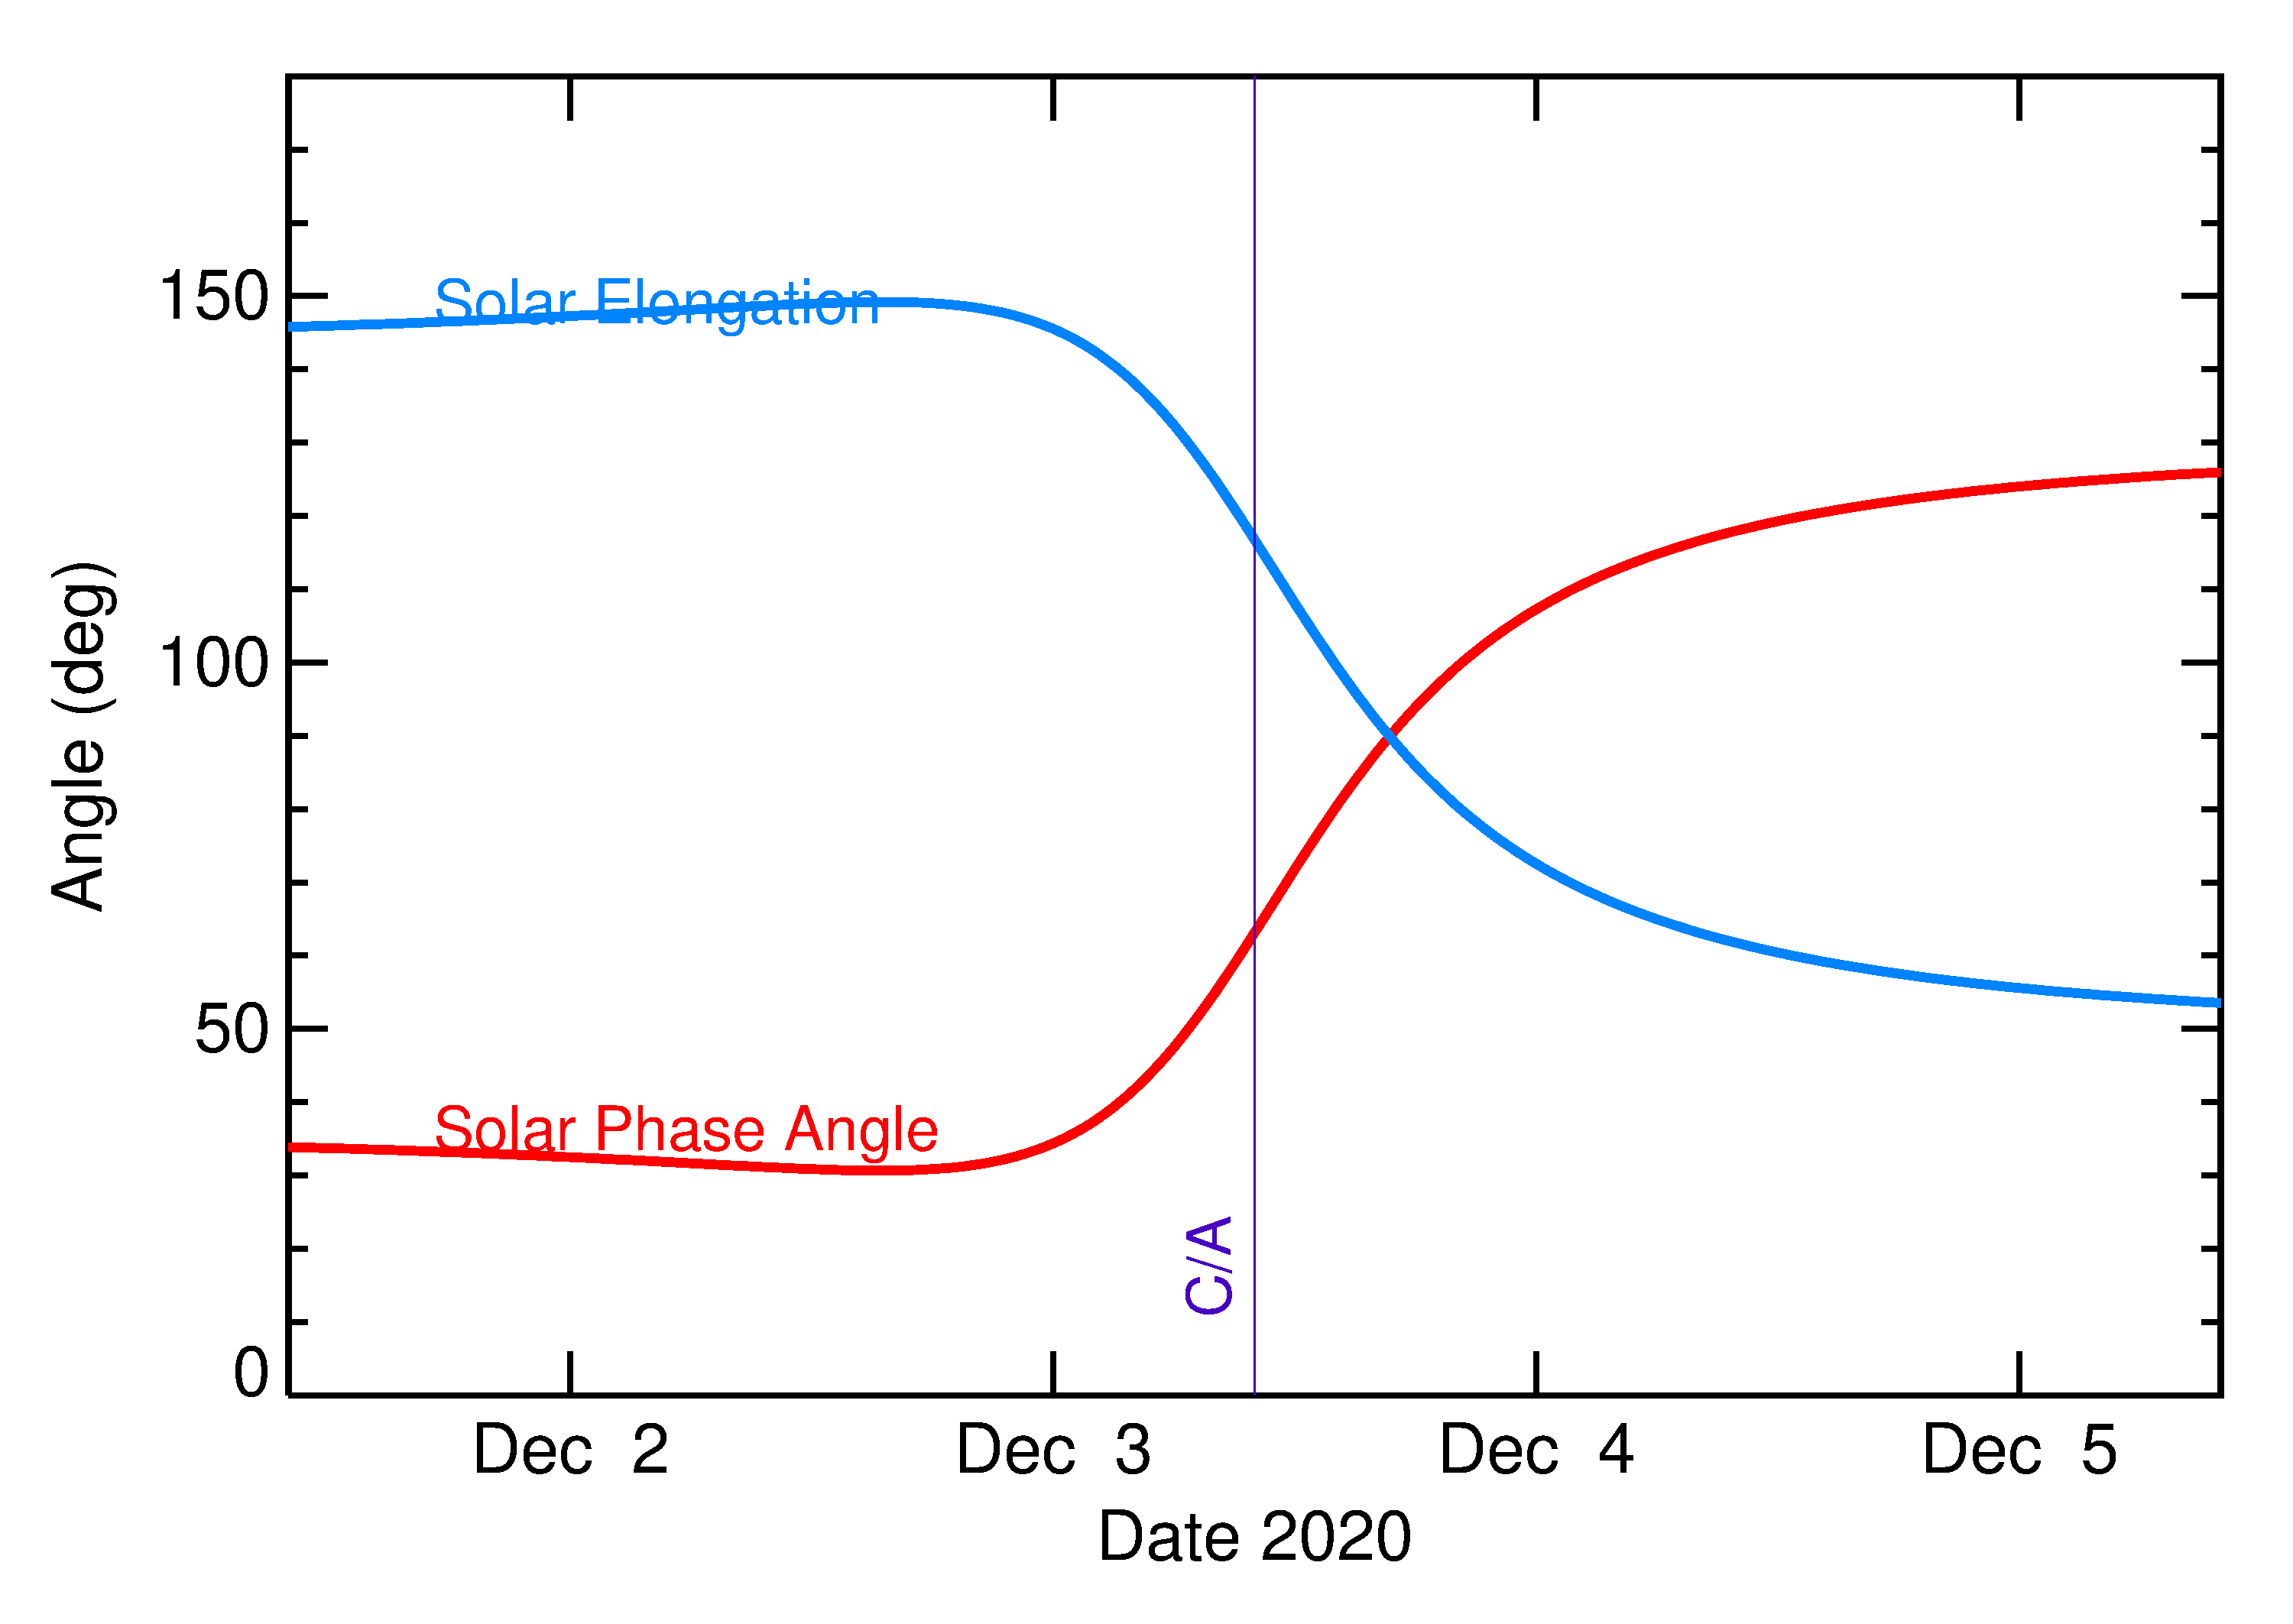 Solar Elongation and Solar Phase Angle of 2020 VZ6 in the days around closest approach